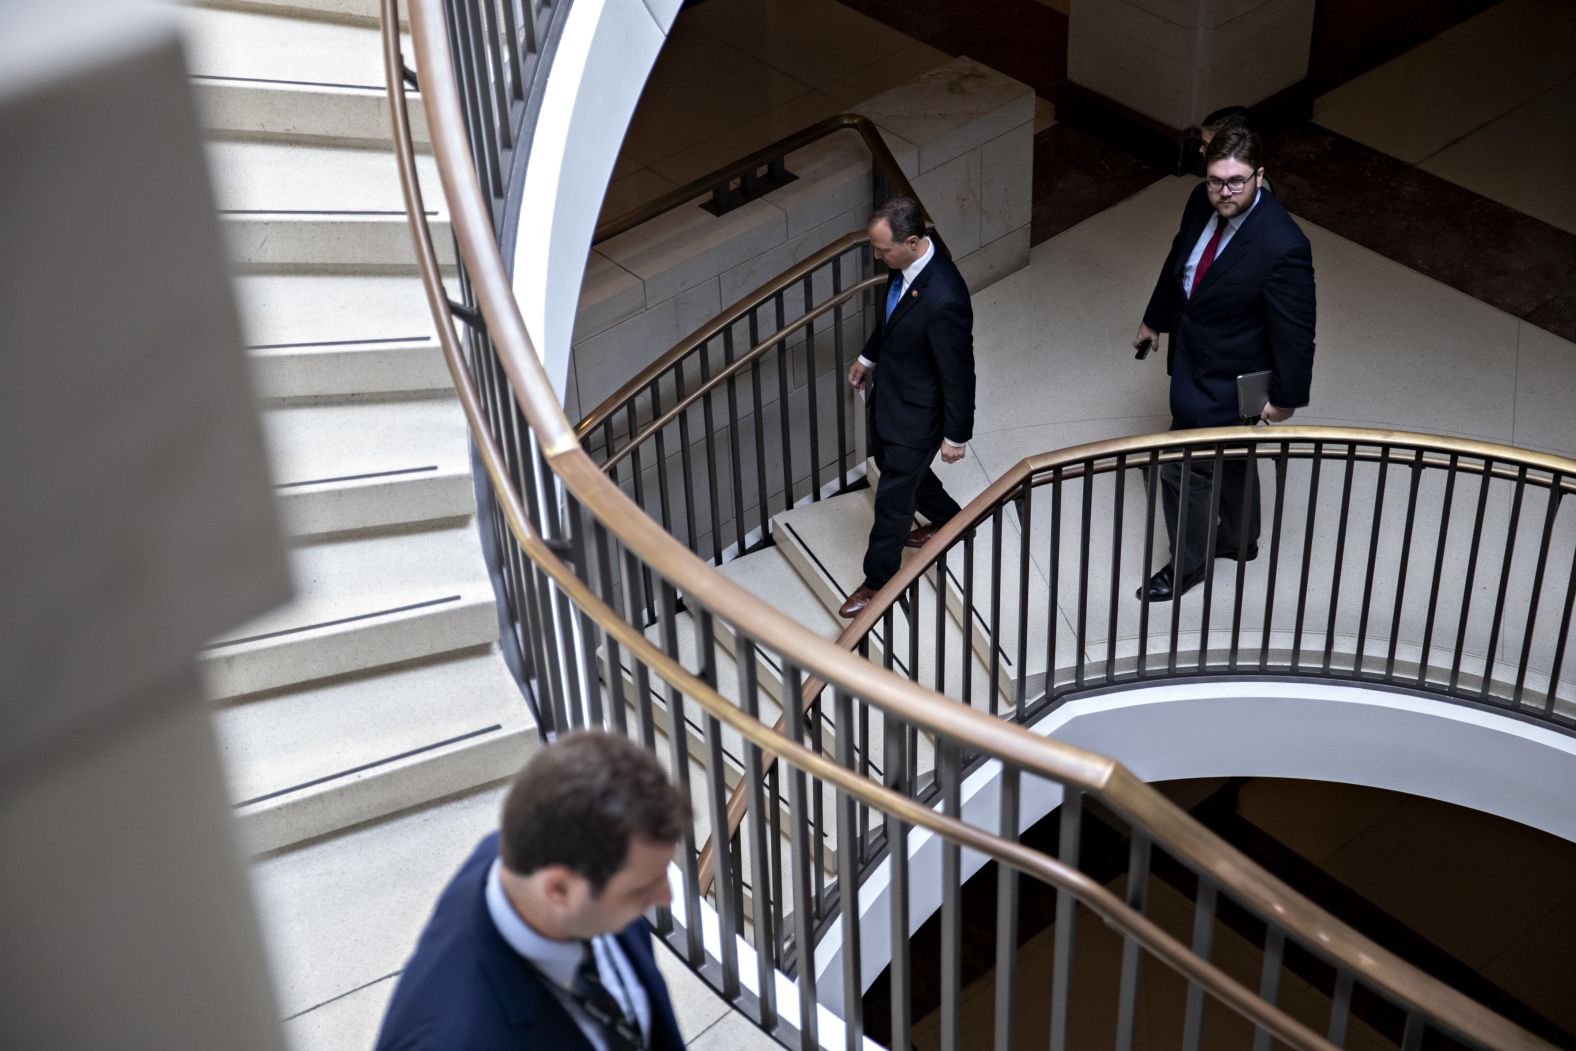 Schiff, center, walks down the steps of the House Visitor Center after a <a href="index.php?page=&url=https%3A%2F%2Fwww.cnn.com%2F2019%2F10%2F02%2Fpolitics%2Fwhite-house-subpoena-threat%2Findex.html" target="_blank">news conference</a> on October 2. Schiff told reporters that any efforts to block information from congressional committees could be viewed as corroborating the allegations. <a href="index.php?page=&url=https%3A%2F%2Fwww.cnn.com%2Fpolitics%2Flive-news%2Ftrump-impeachment-inquiry-10-02-2019%2Fh_0205b4b28ae8b5656689d6b6d7858537" target="_blank">He also reiterated</a> that the whistleblower has the right to remain anonymous, saying Congress would do "everything in our power" to make sure that the person is protected.